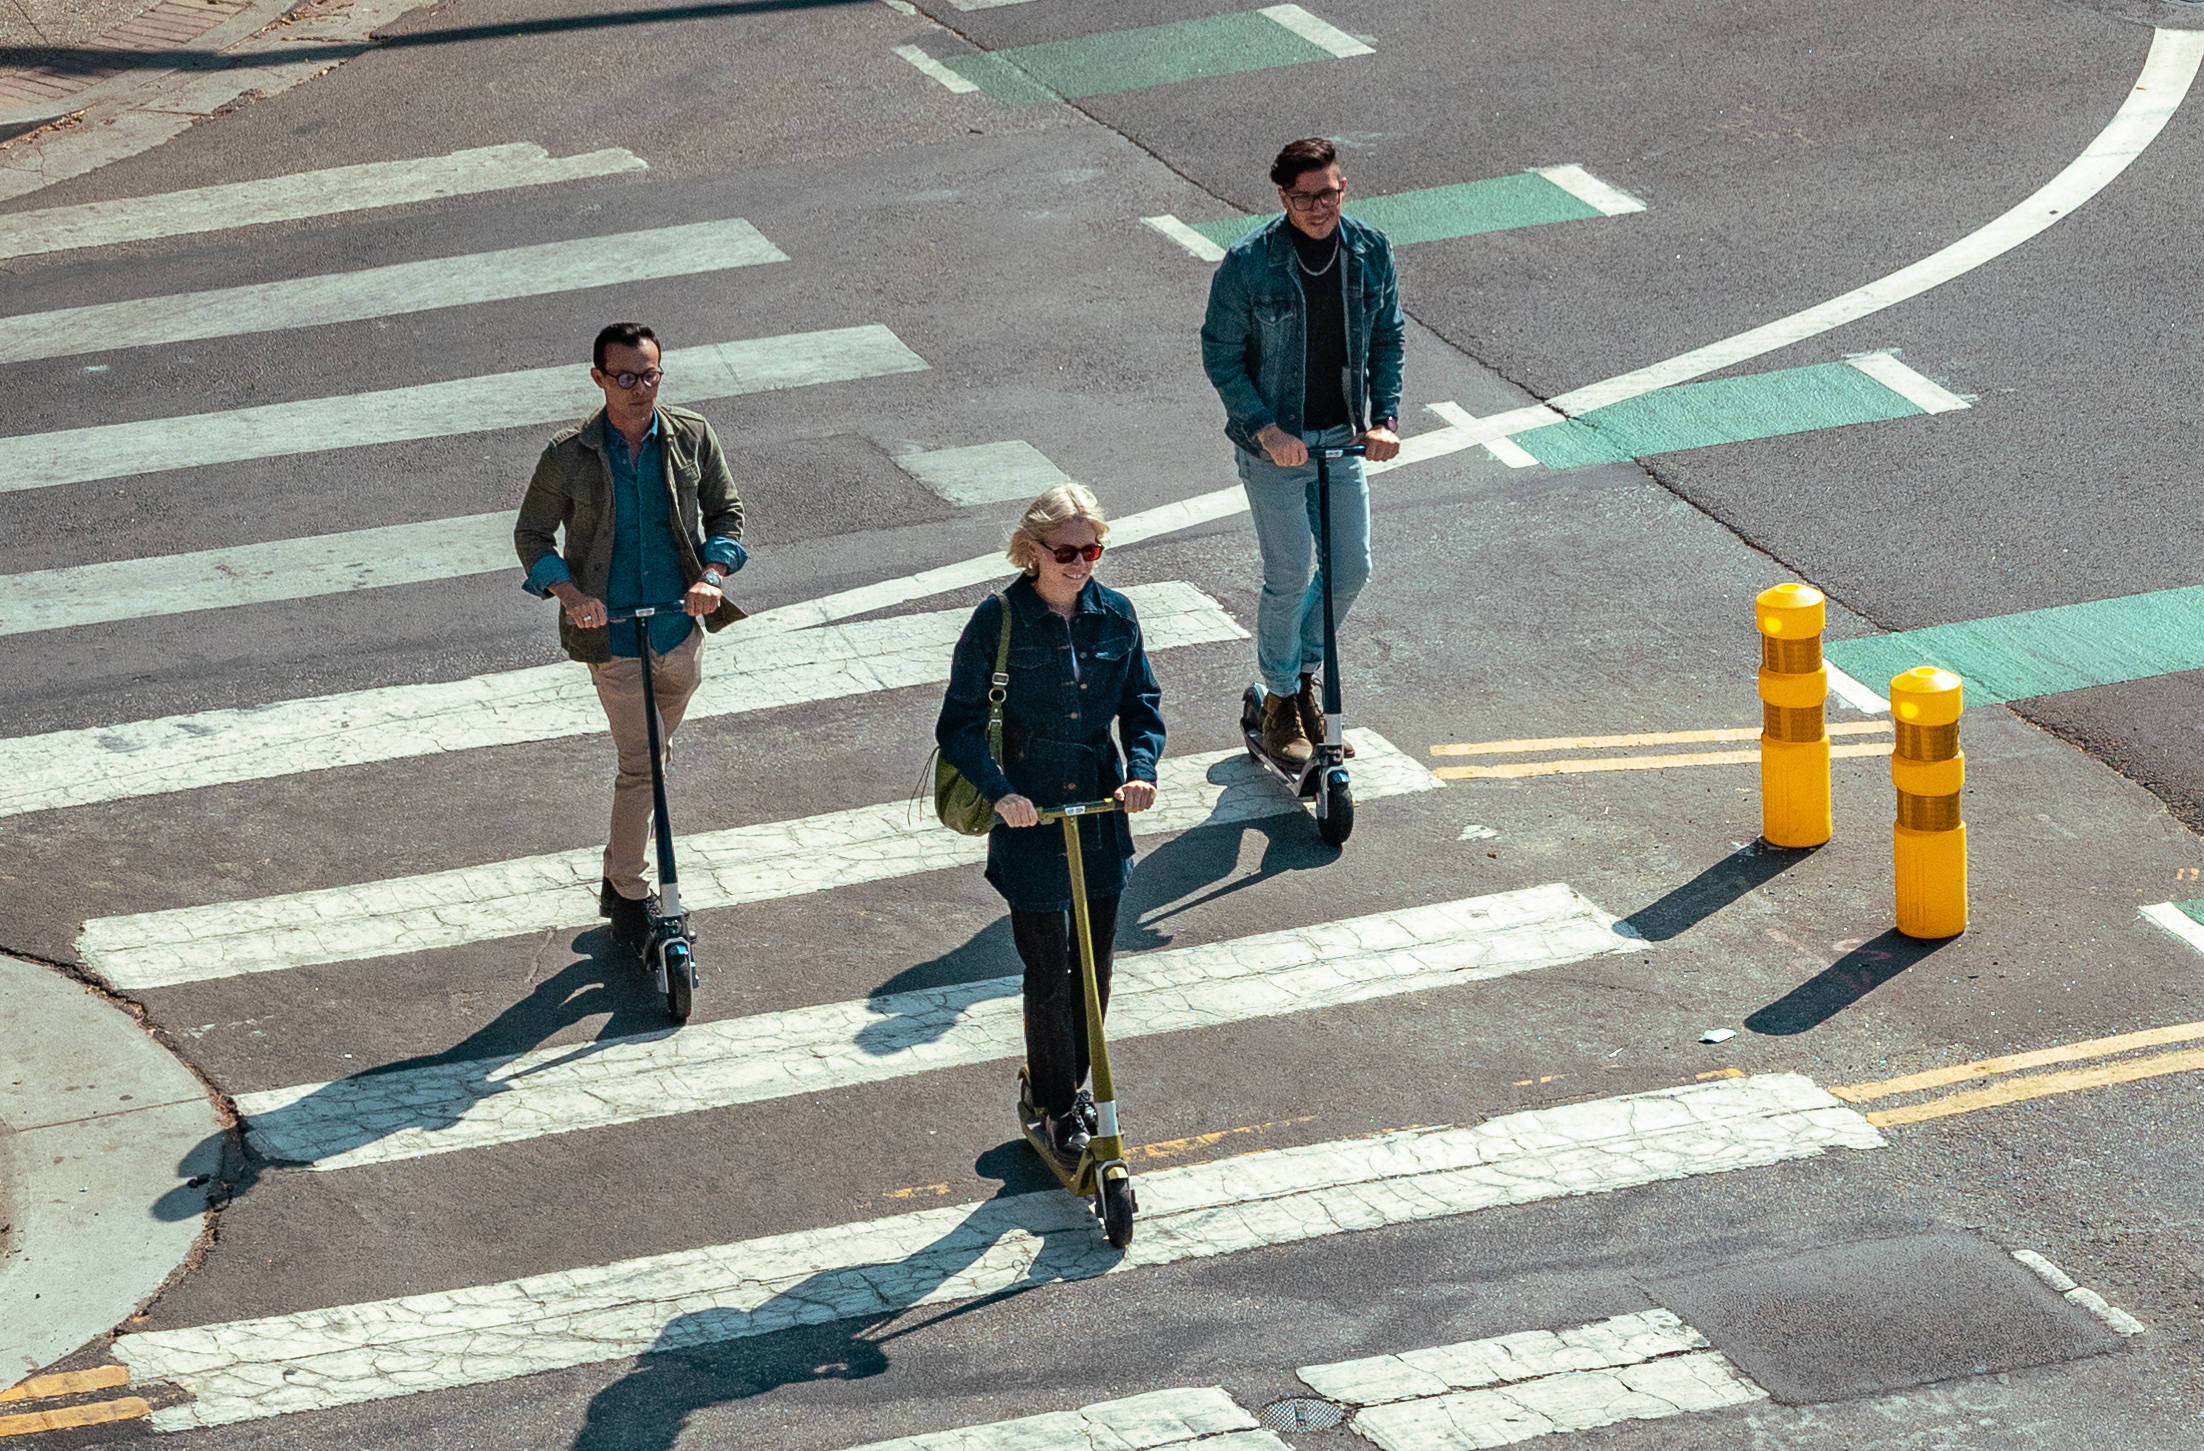 People cross the pedestrian crossing with electric scooters